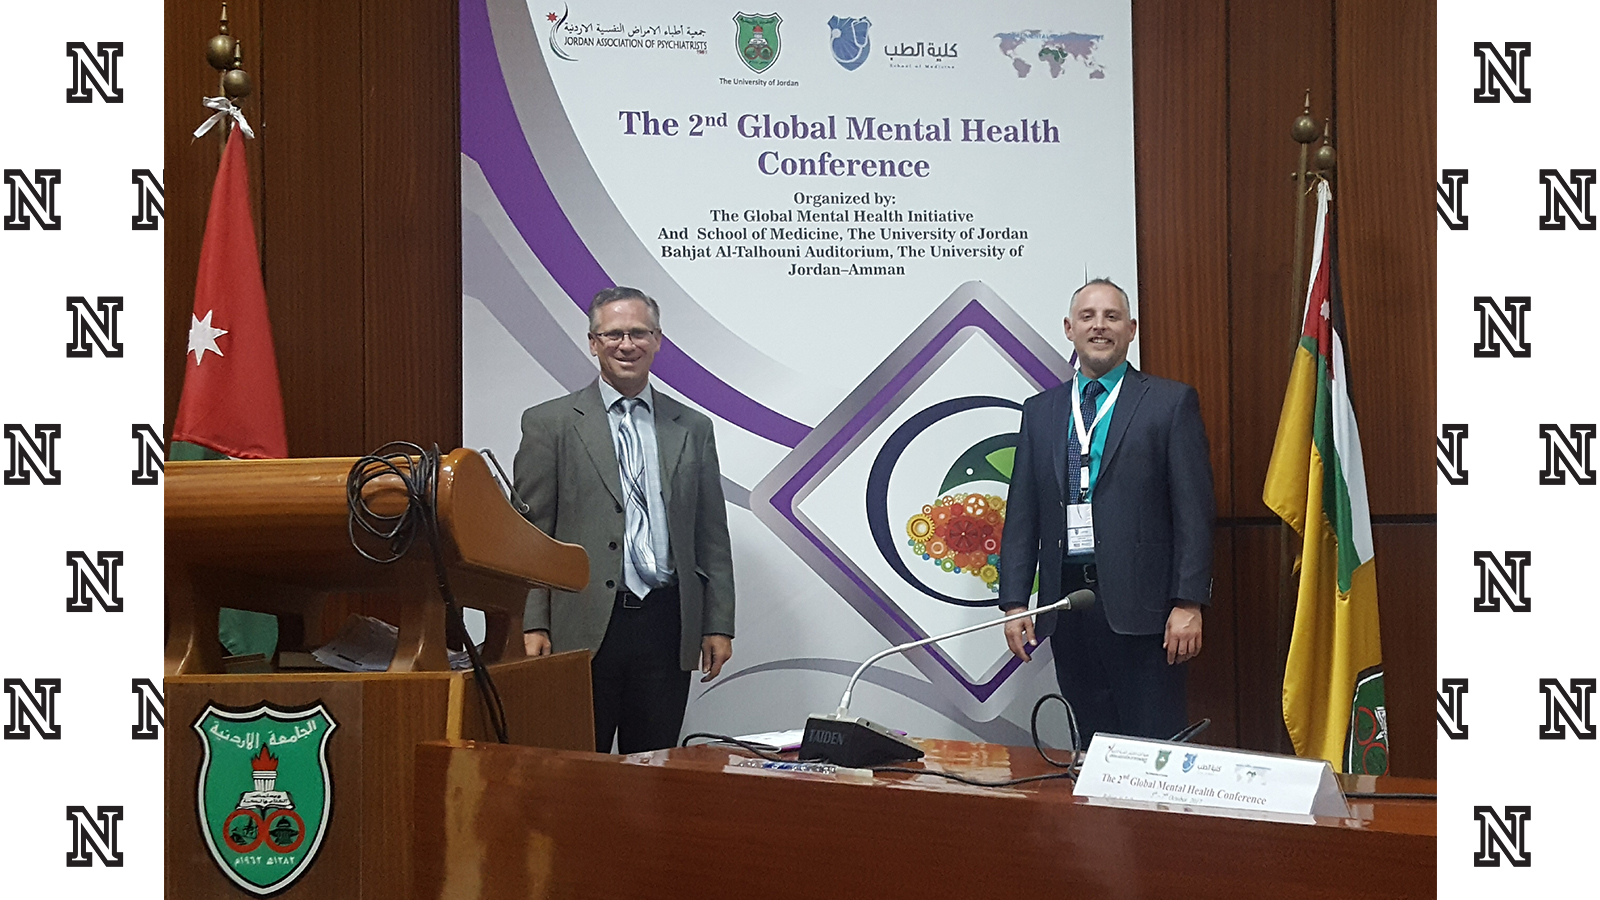 Bischoff and Springer present at the Second Global Mental Health Conference in Jordan